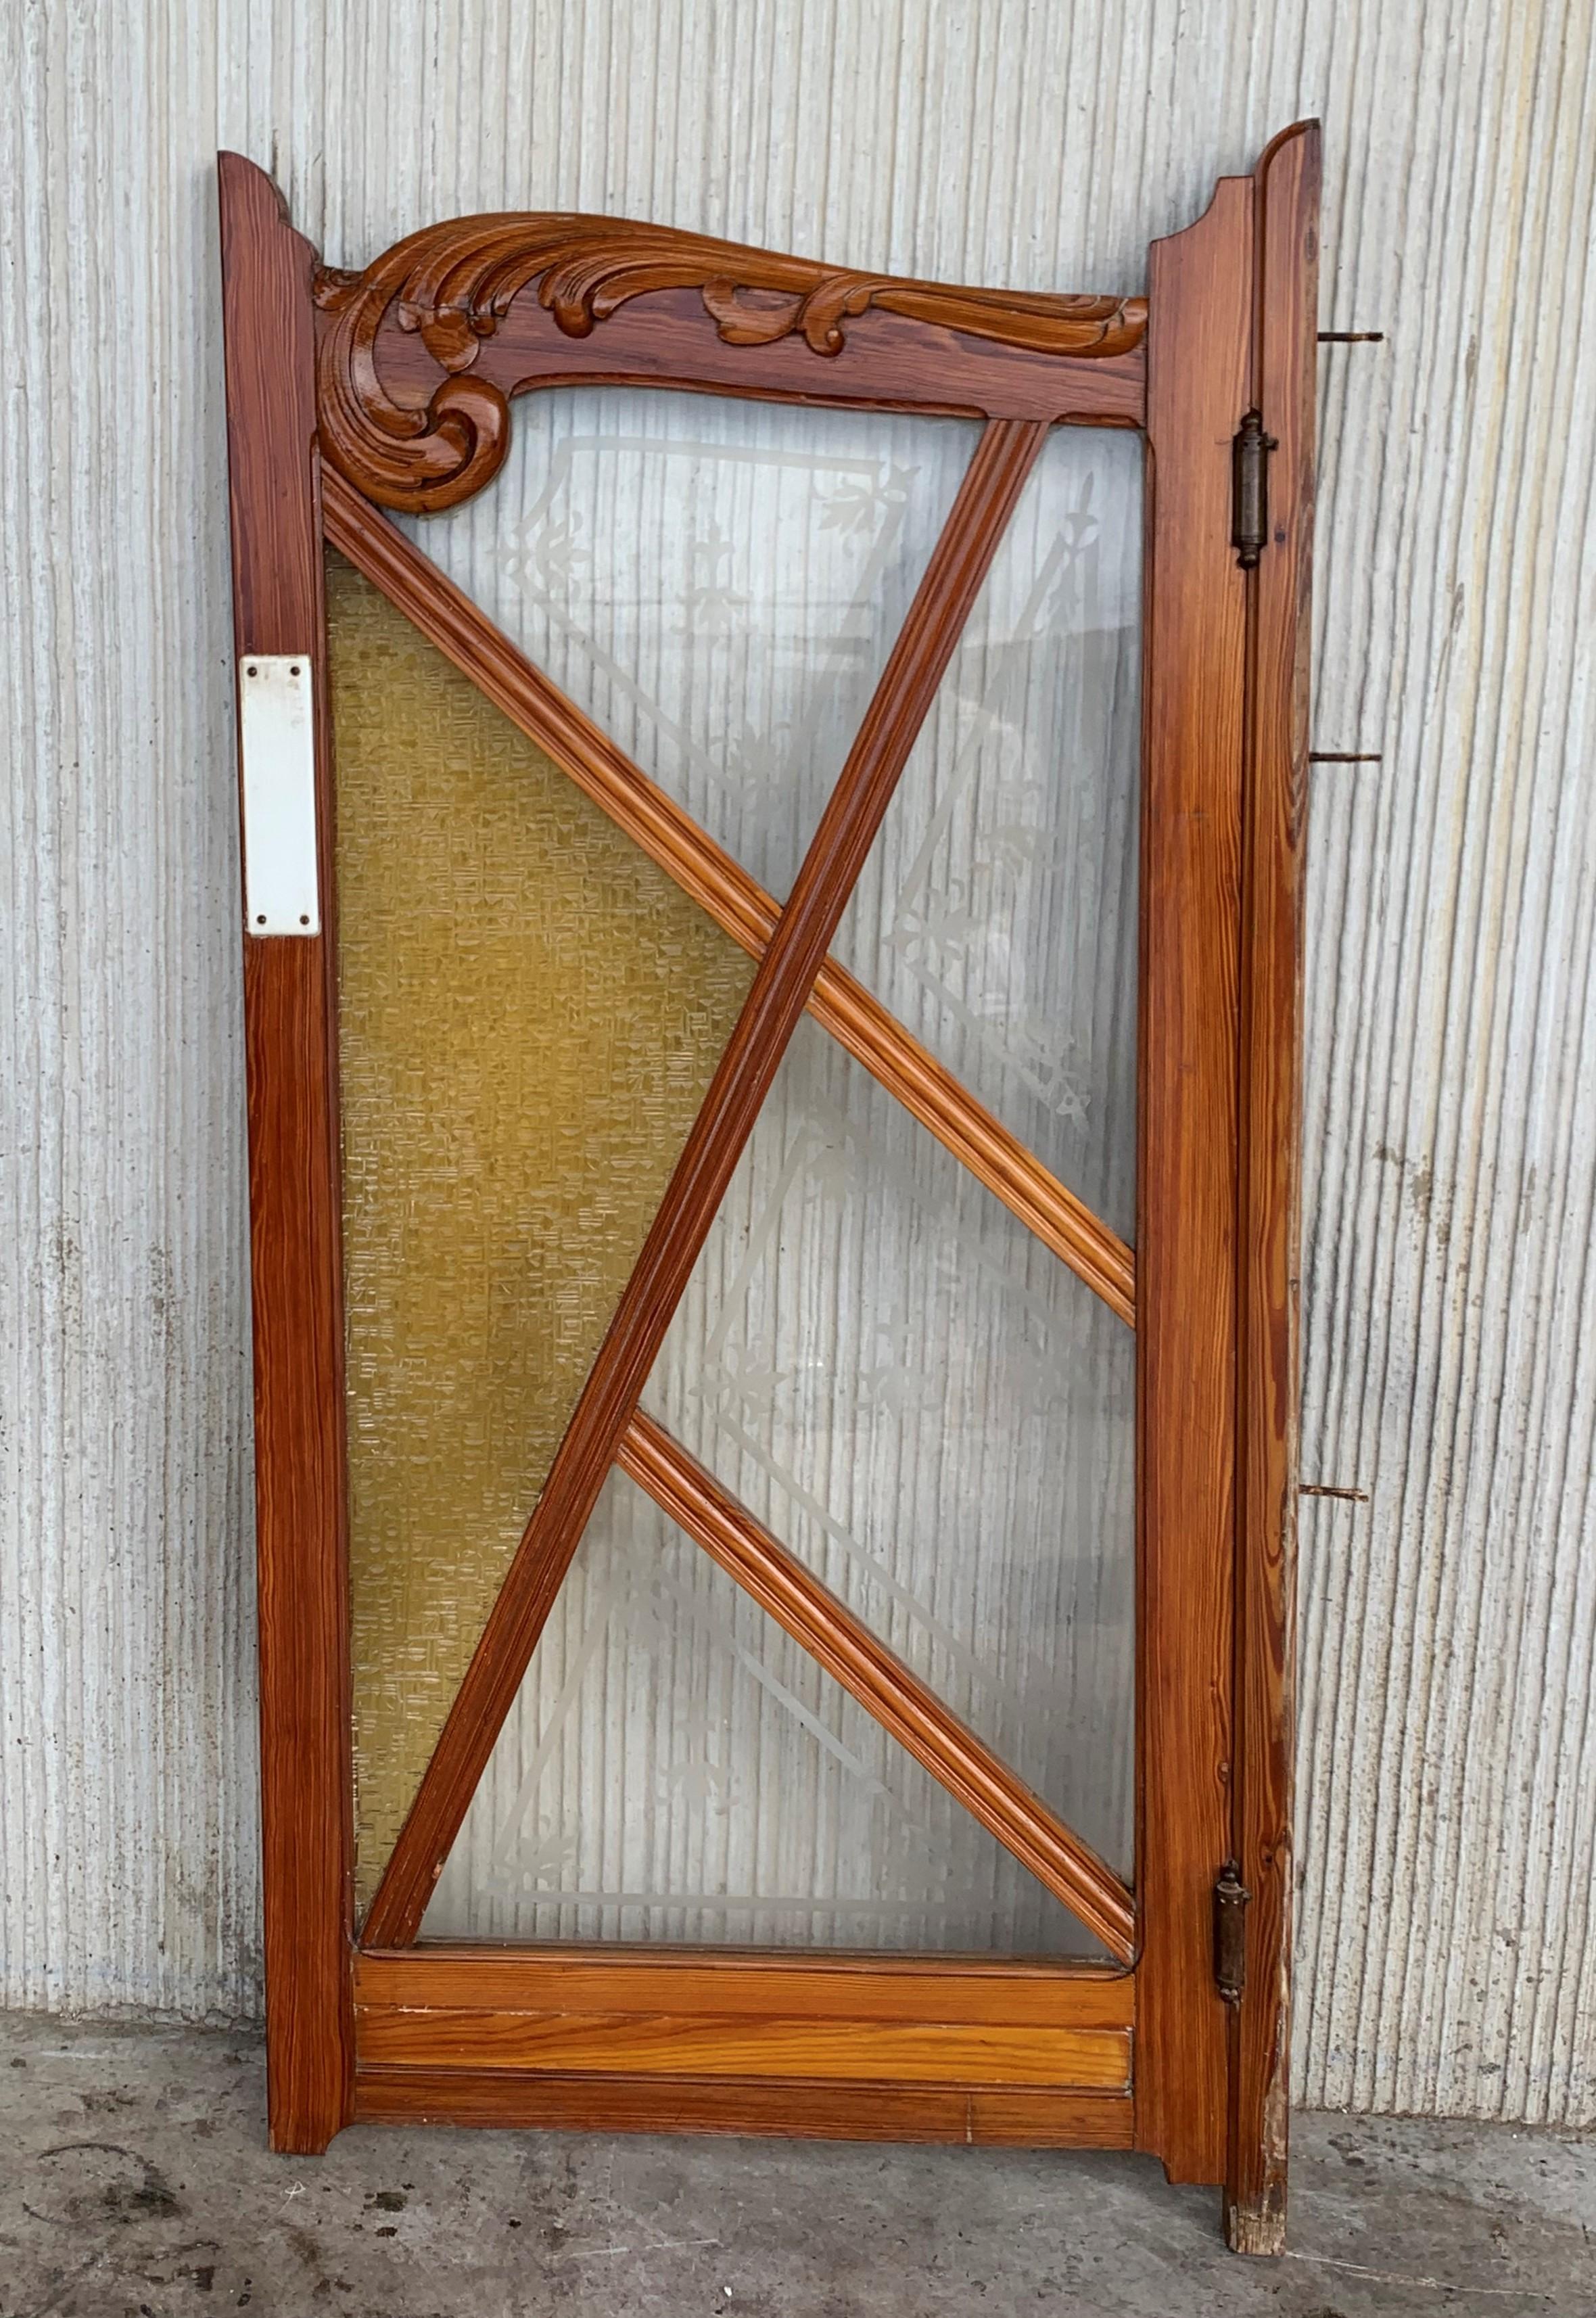 So many uses for this stained and beveled glass tiger cut oak pub or salon door. Entrance to your home bar, pantry or just a divide from one section of your home to another. The side wood pieces are the jamb for the door. It is meant to hang in a